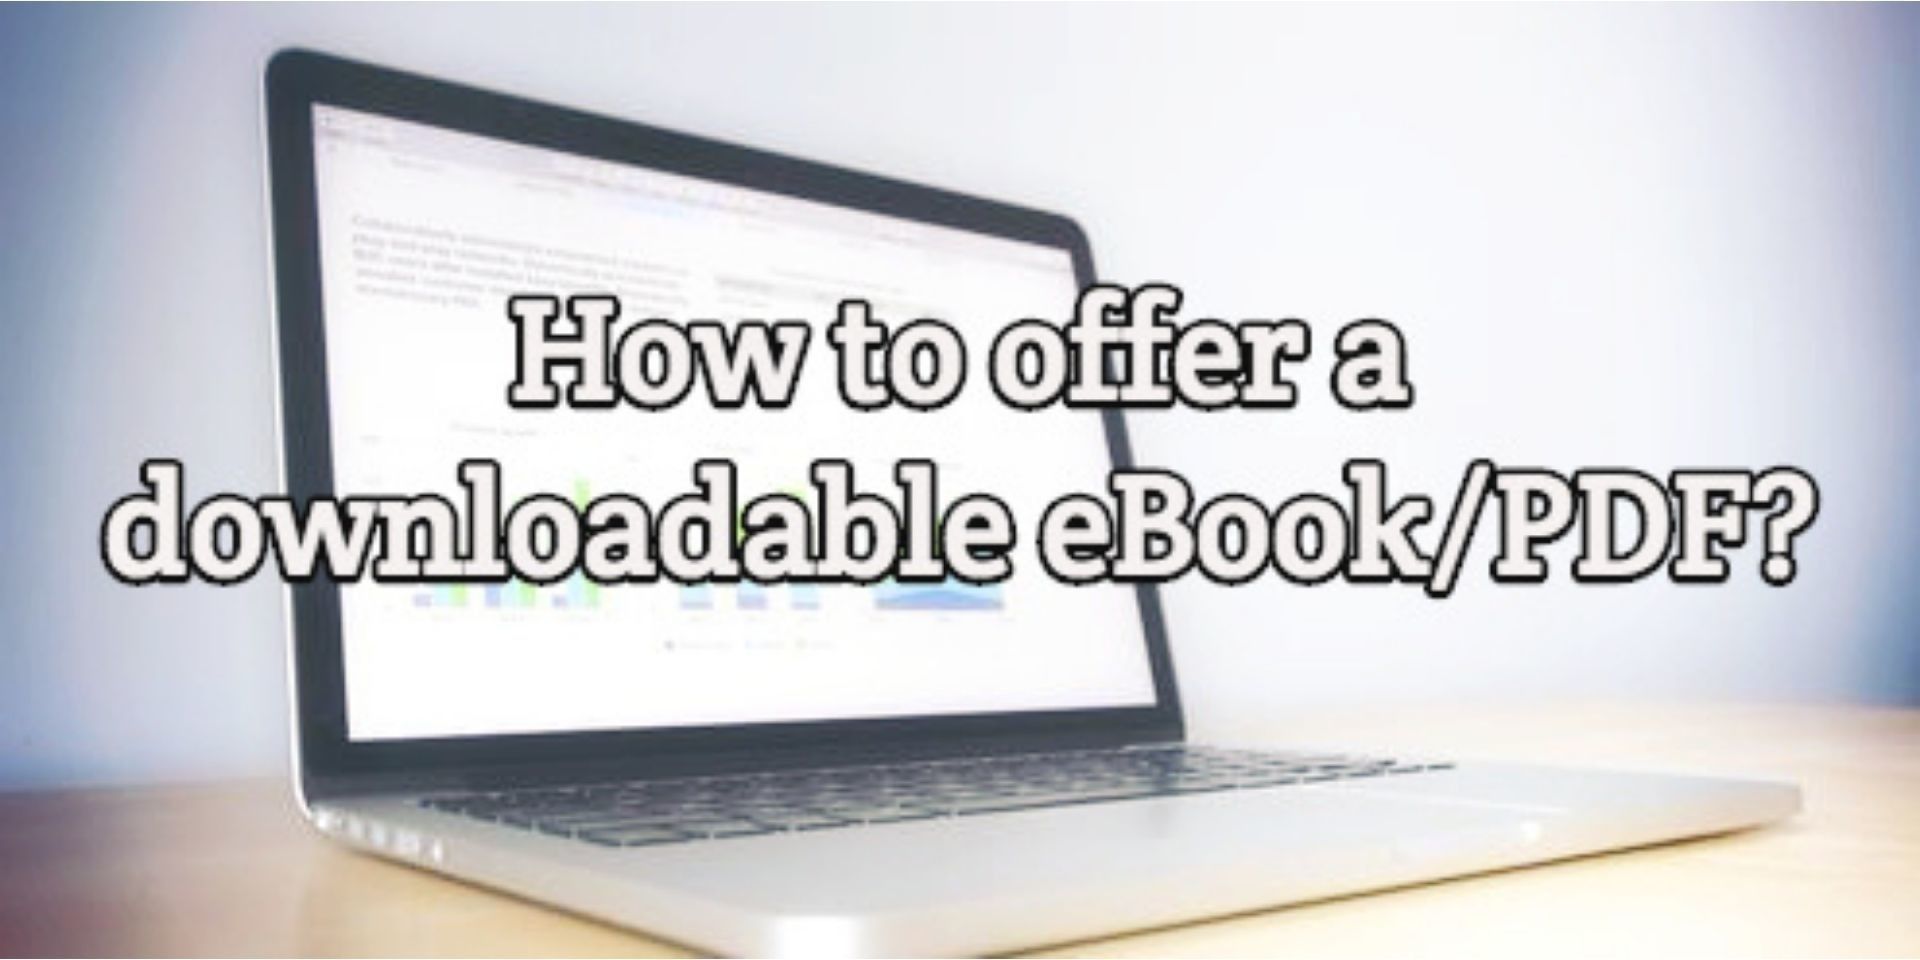 best way to offer a downloadable ebook